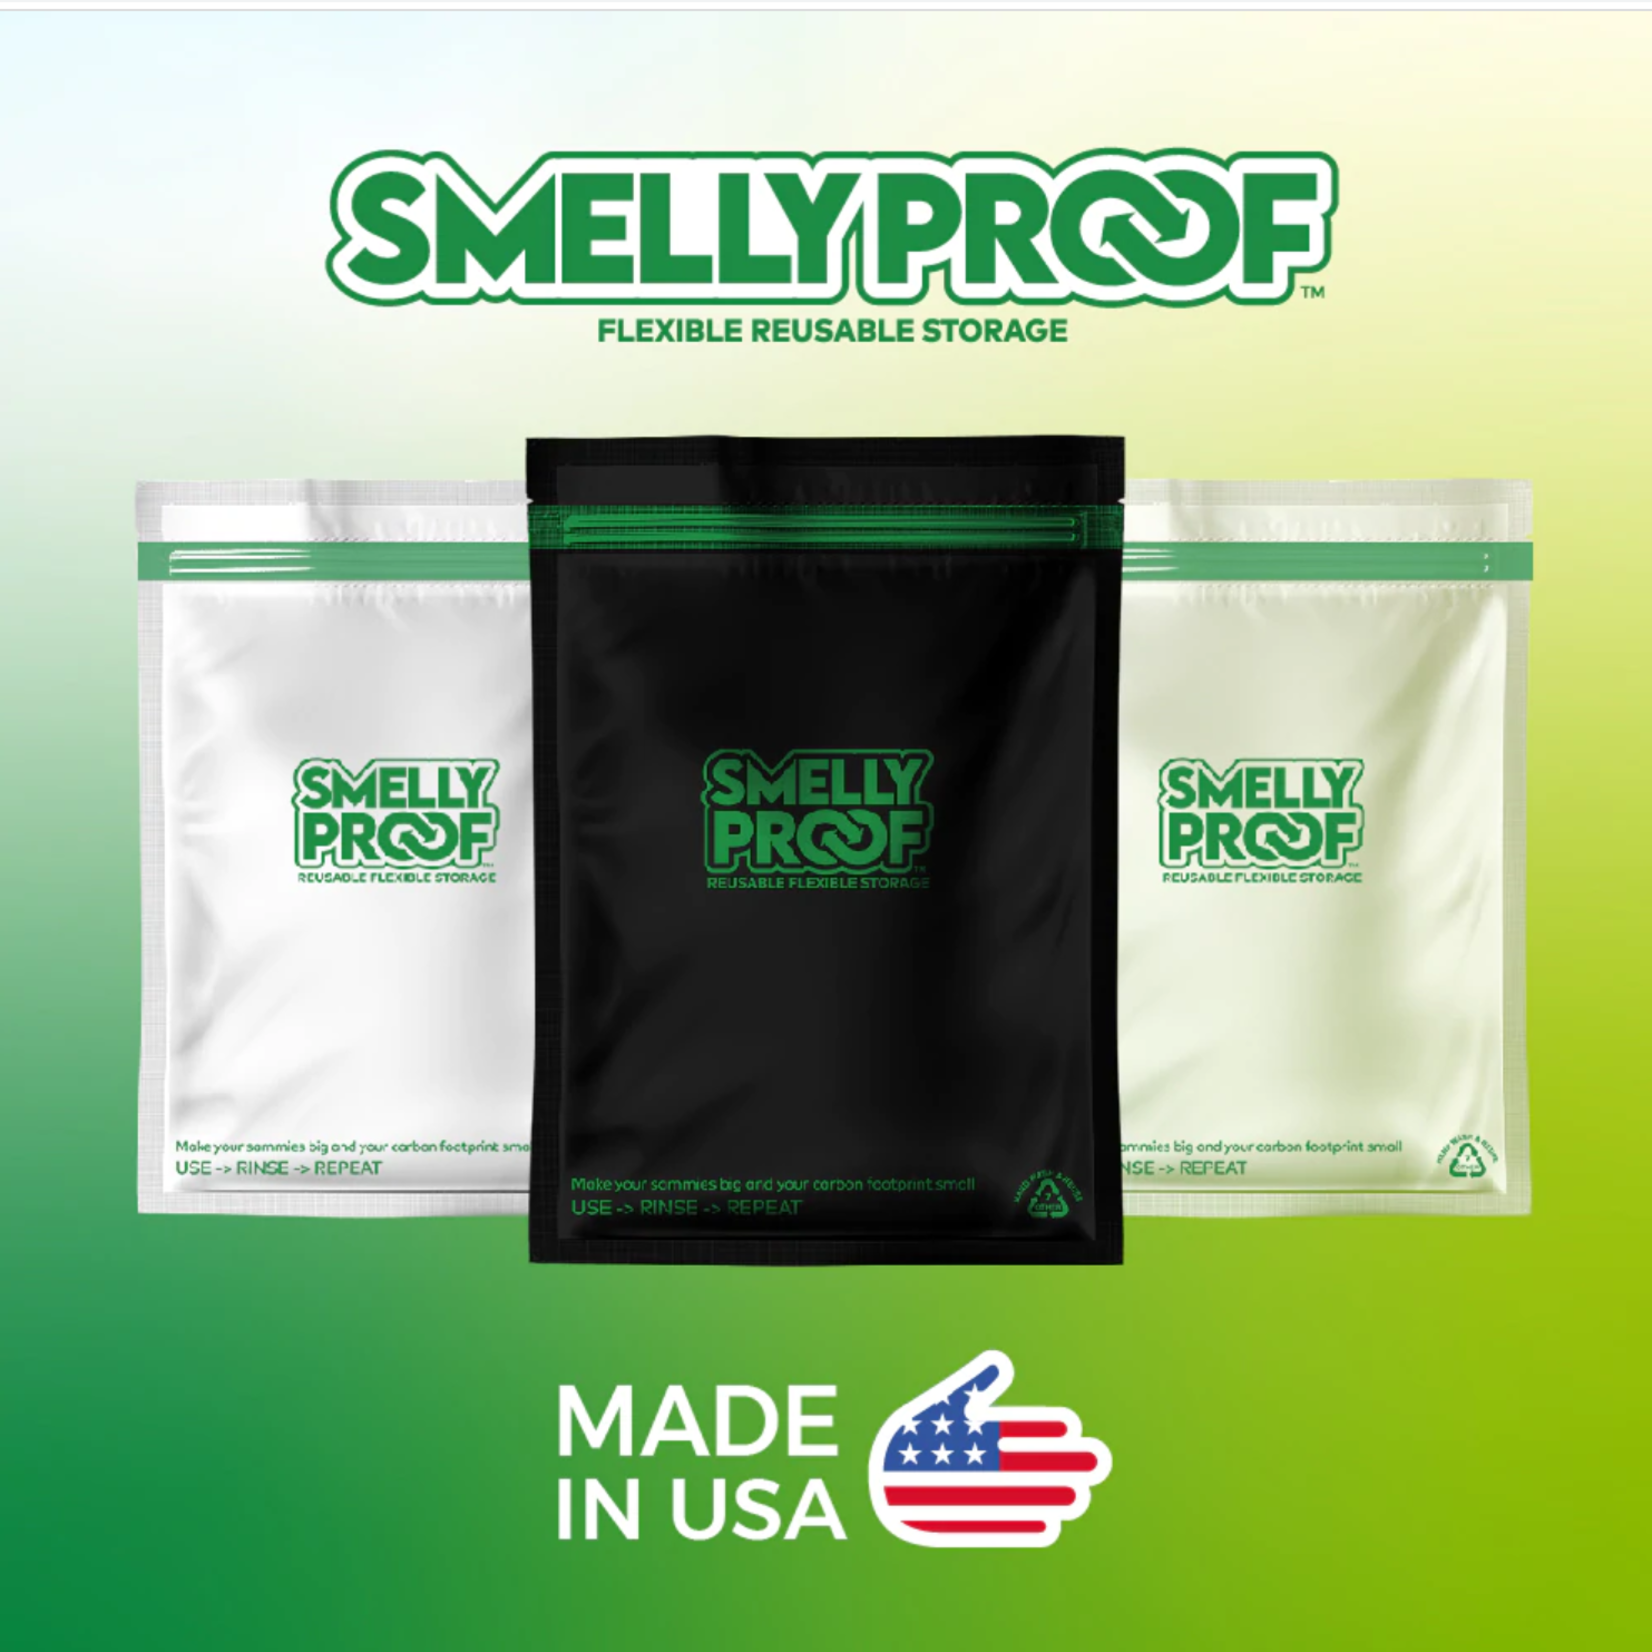 Smelly Proof Smelly Proof Bags